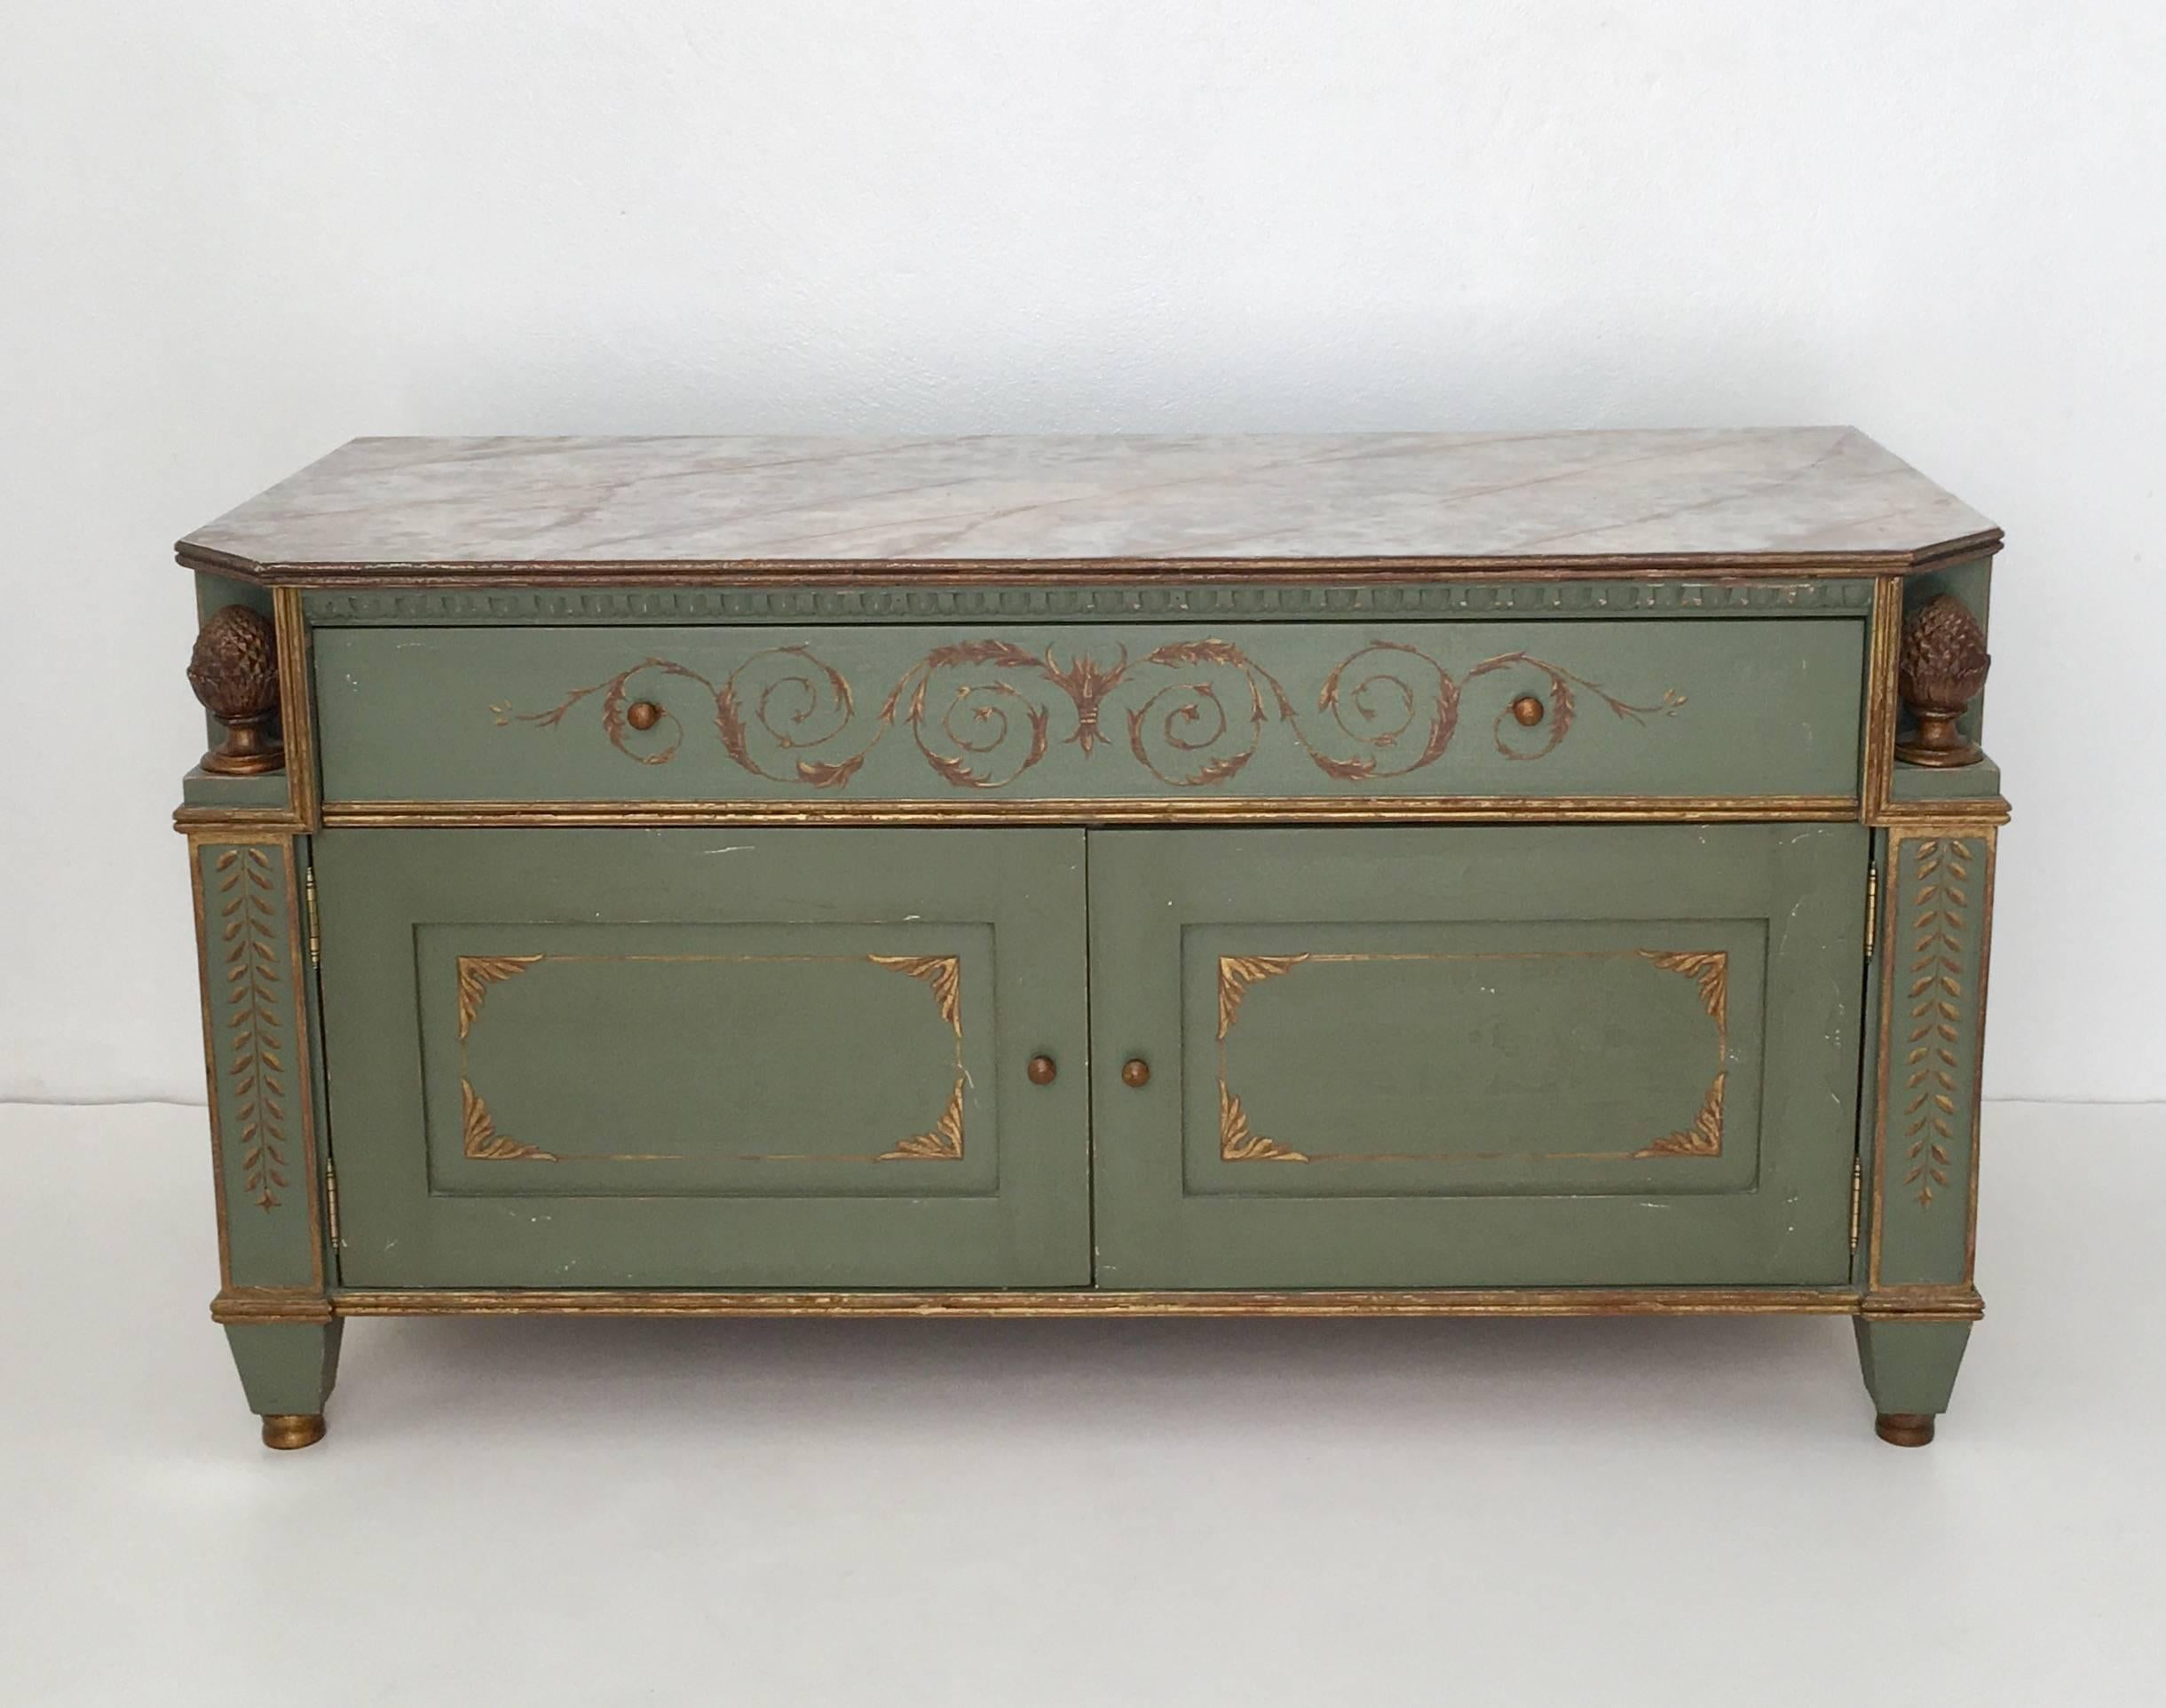 Glamorous pair of neoclassical style painted commodes, circa 1950s-1960s. These stunning richly painted Gustavian green painted chests with faux painted marble tops are embellished with gilt decorative accents and are designed with a single pull-out